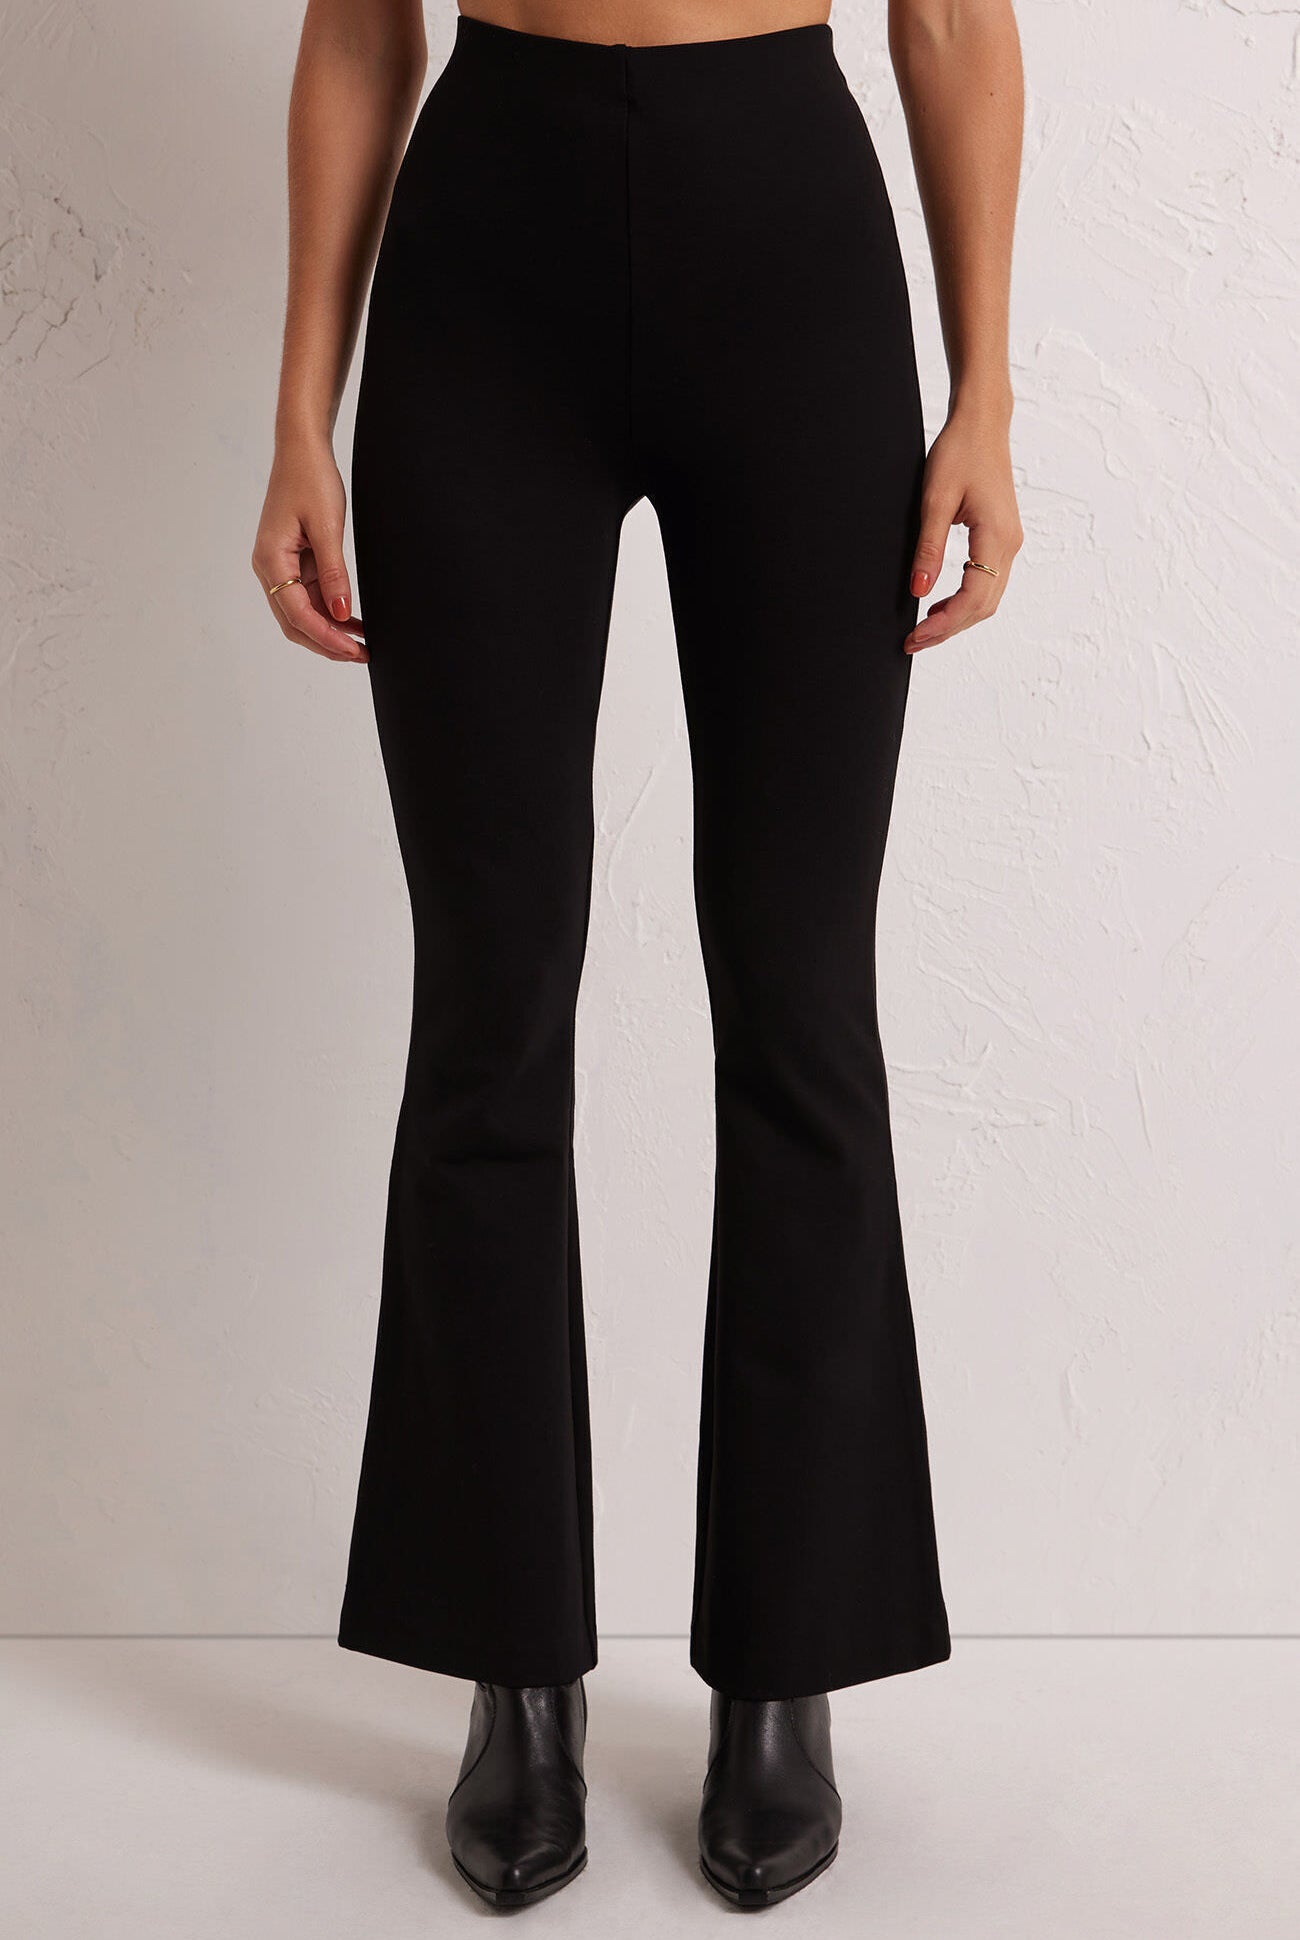 Do It All Flare Pant-Pants-Vixen Collection, Day Spa and Women's Boutique Located in Seattle, Washington